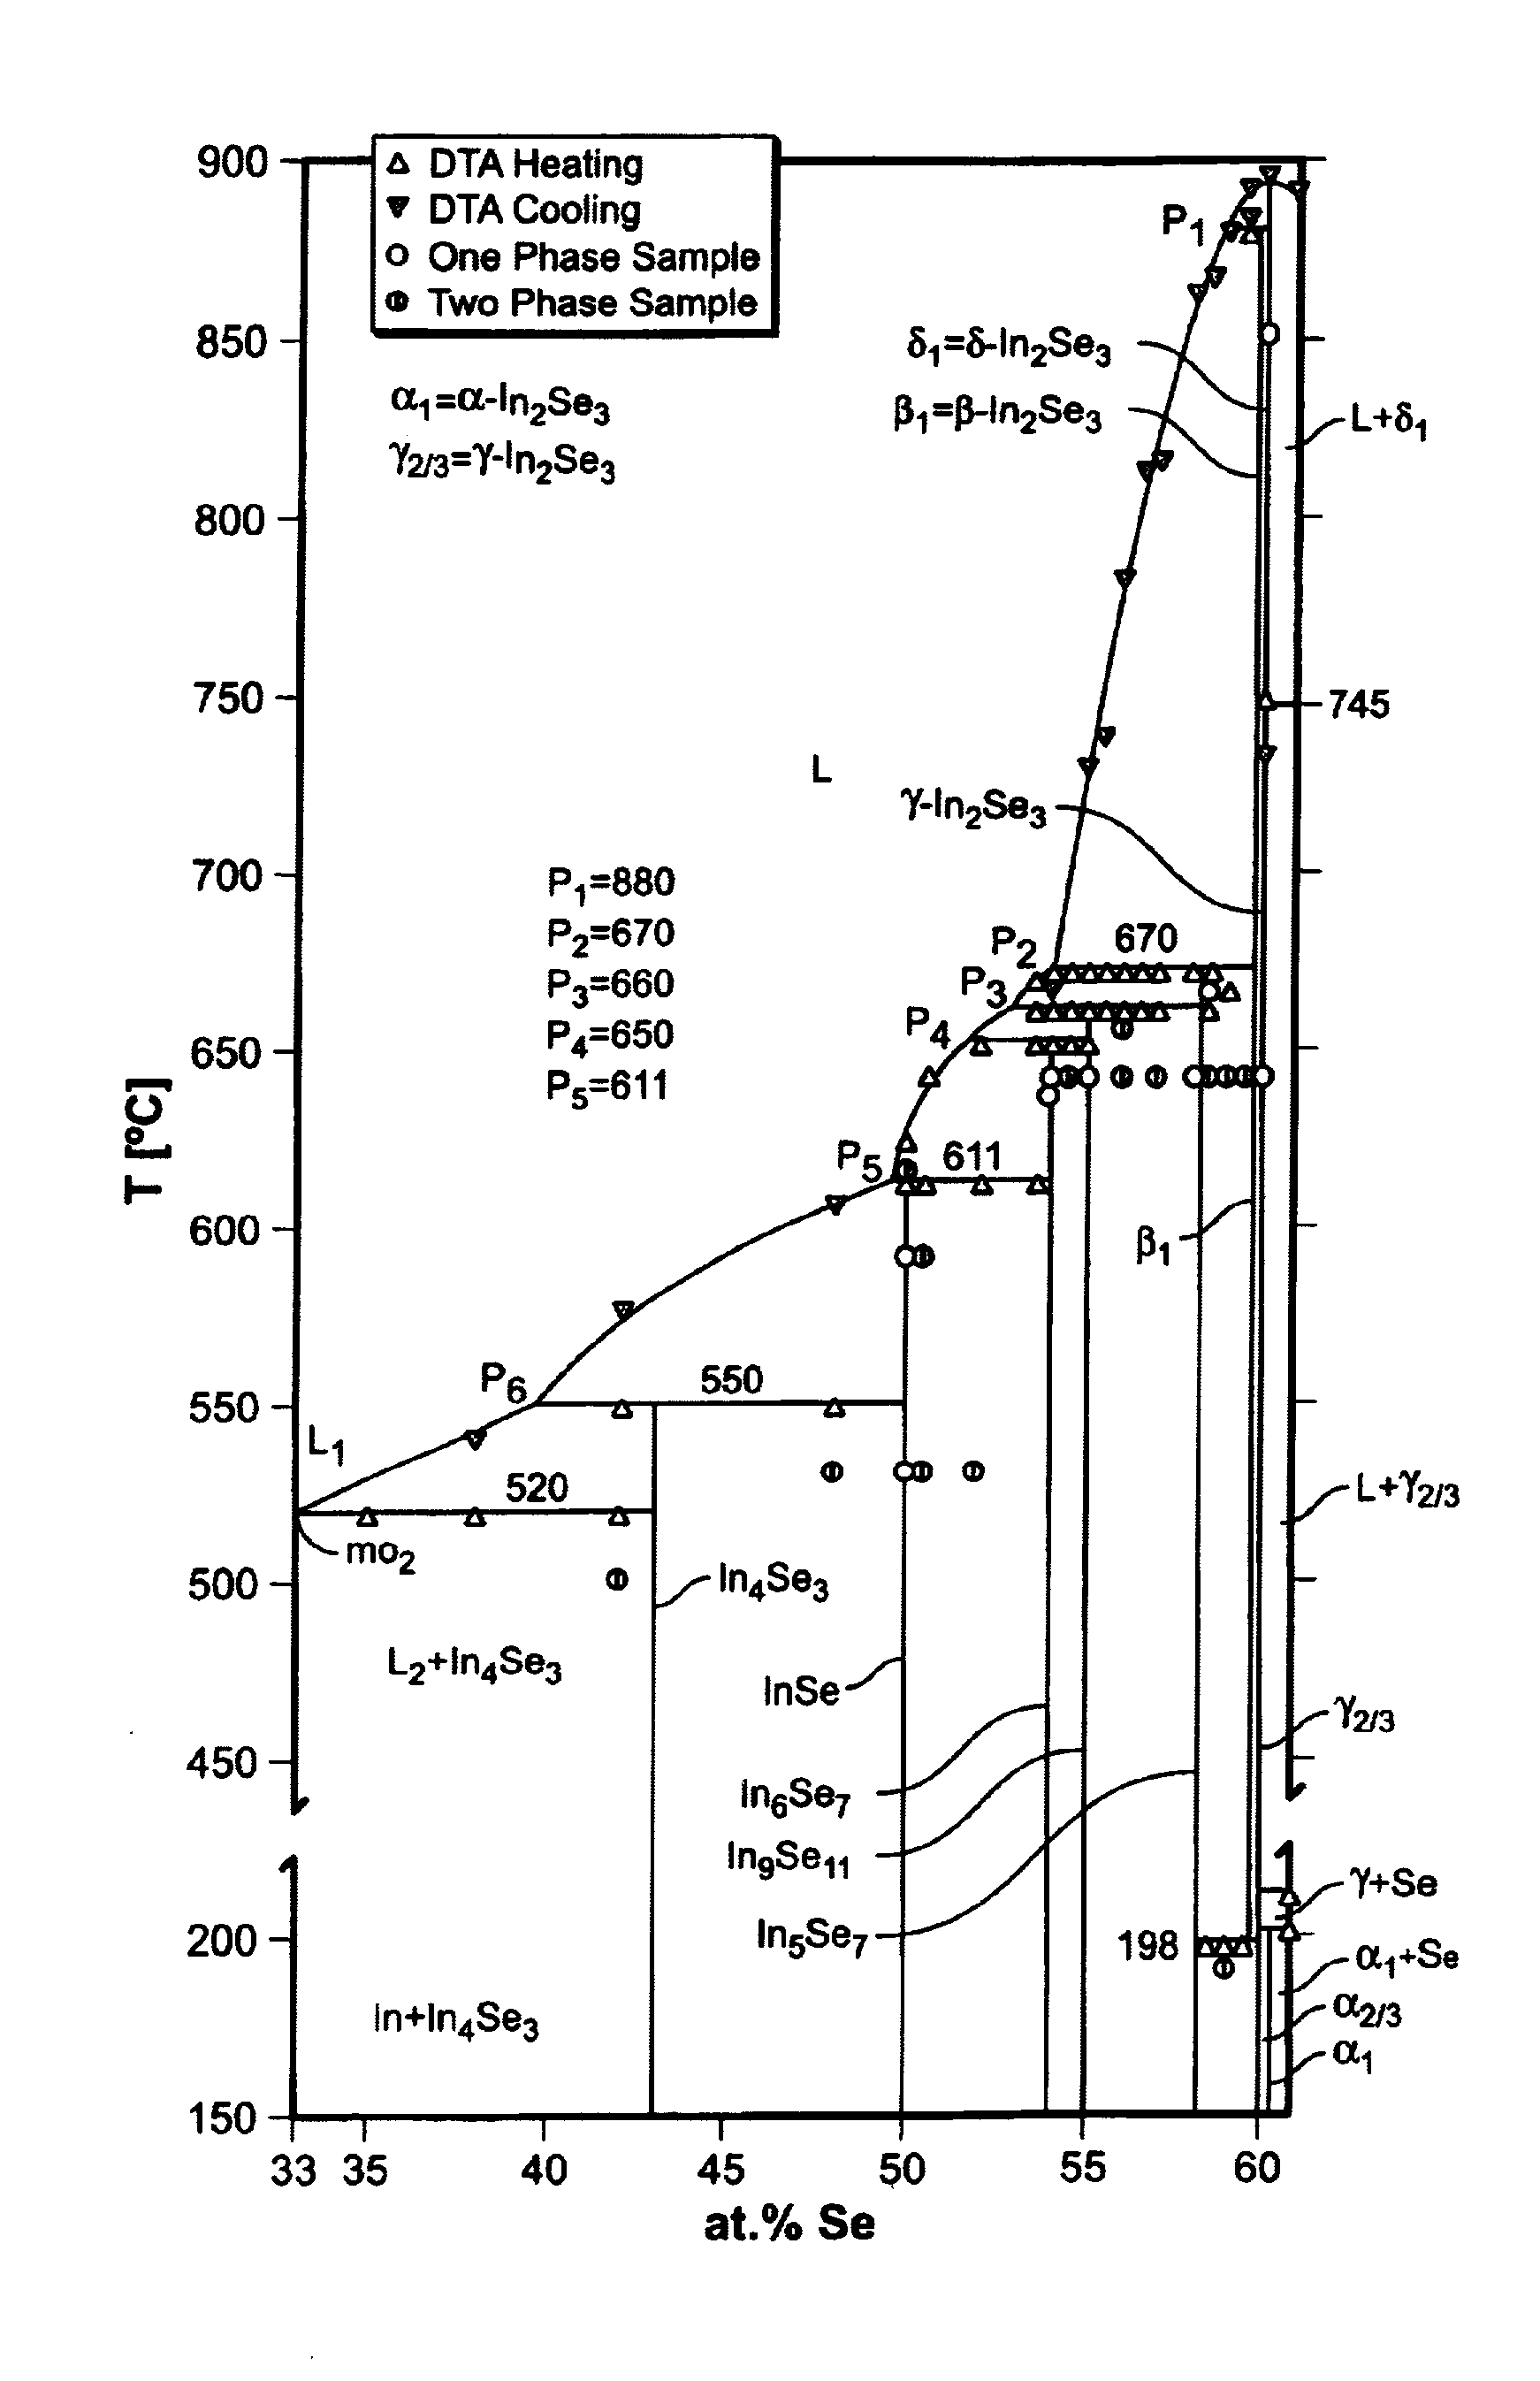 Preparation of compounds based on phase equilibria of Cu-In-Se